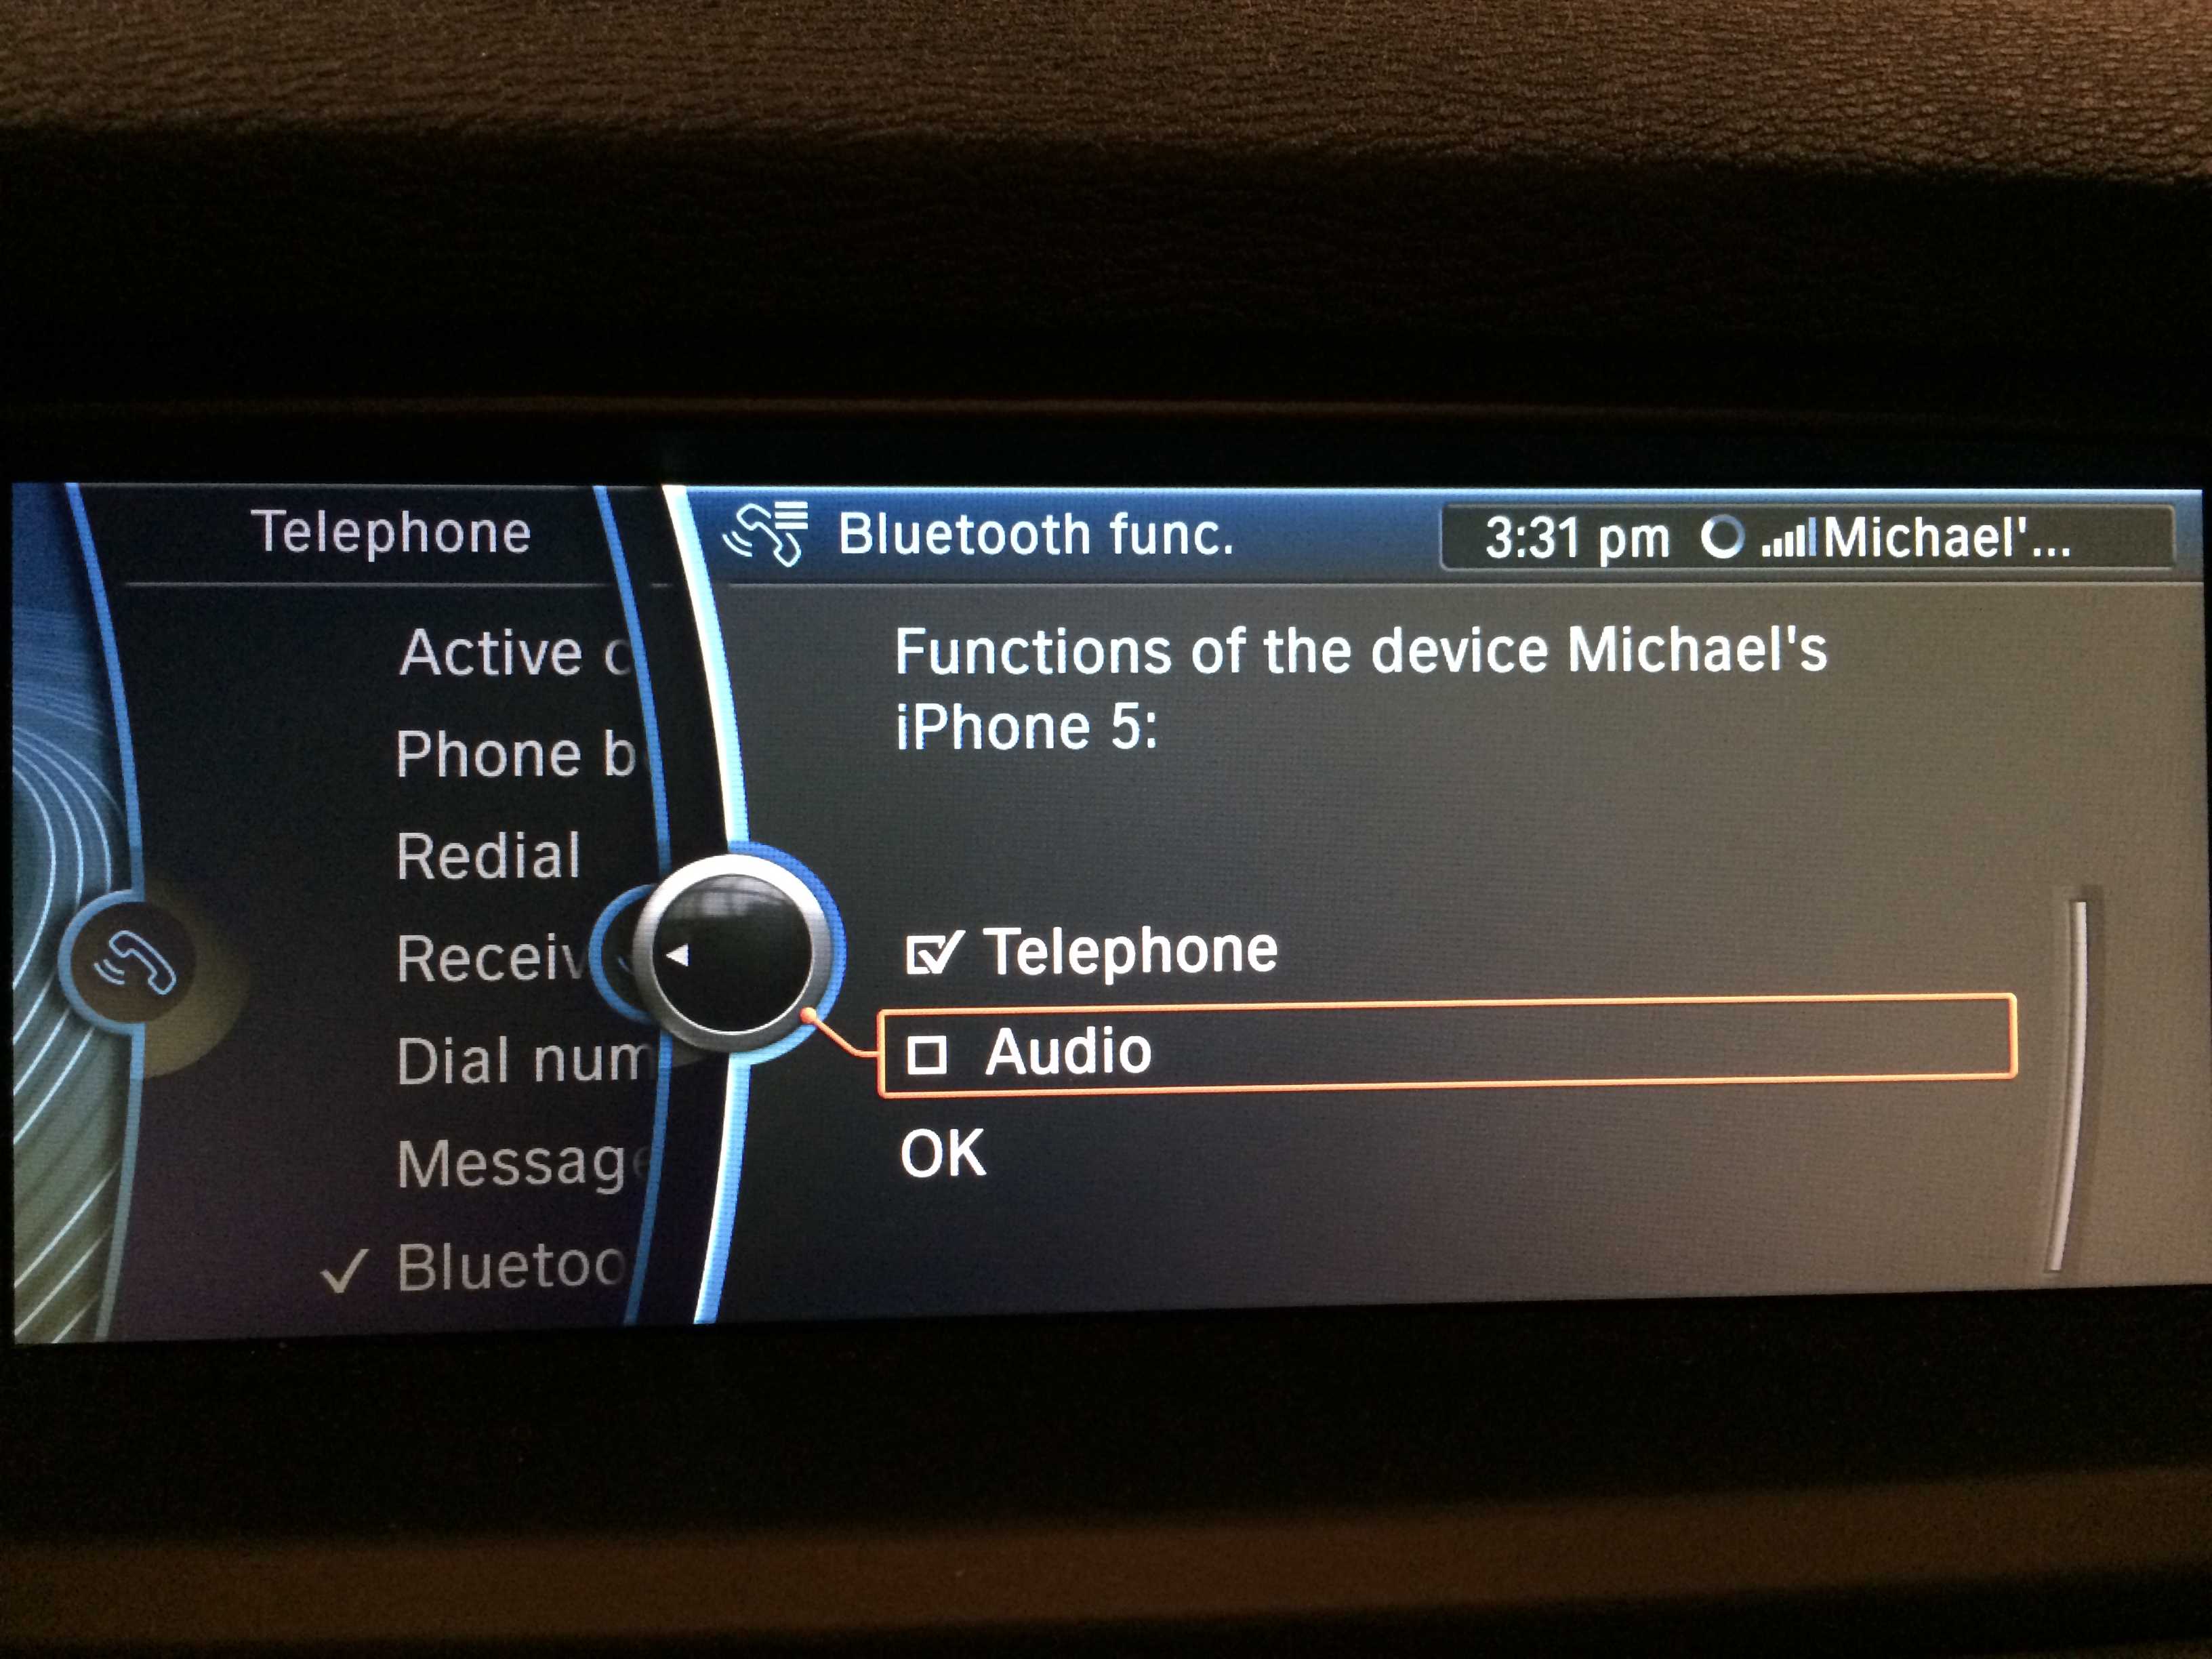 Iphone 5 bluetooth problems with bmw #5